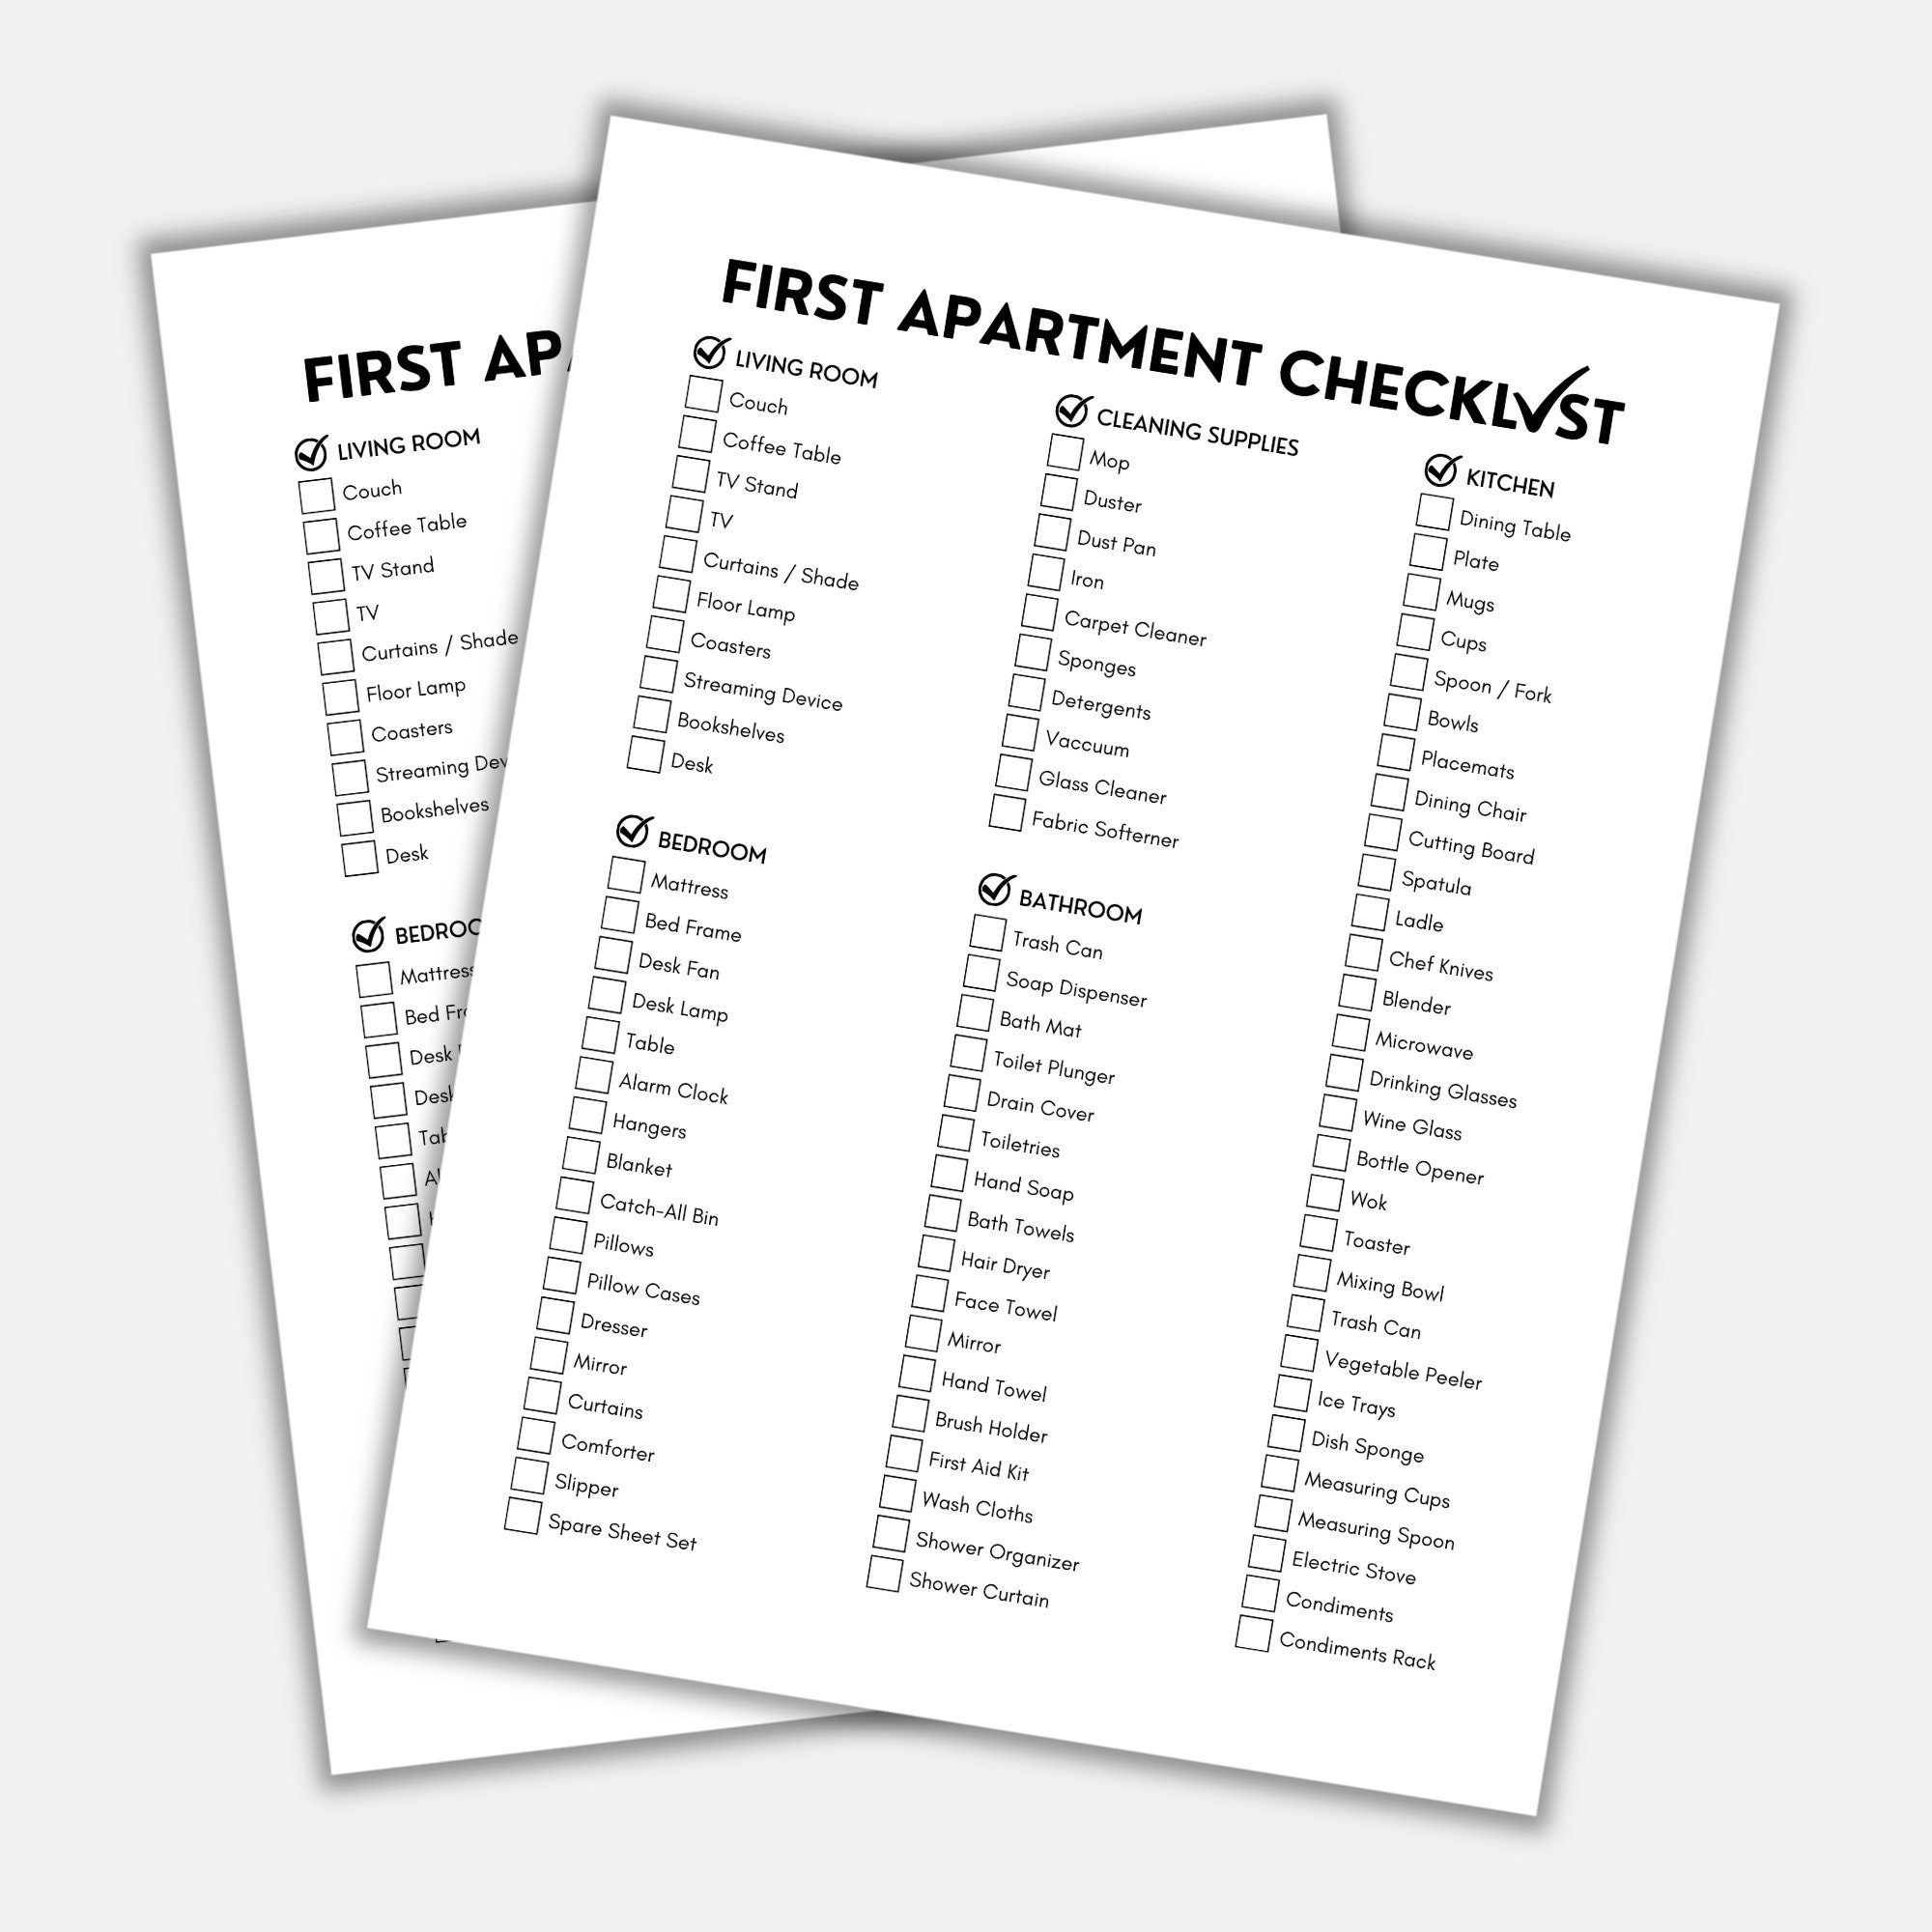 First Apartment Must Haves Checklist, Gallery posted by Yealim Kong